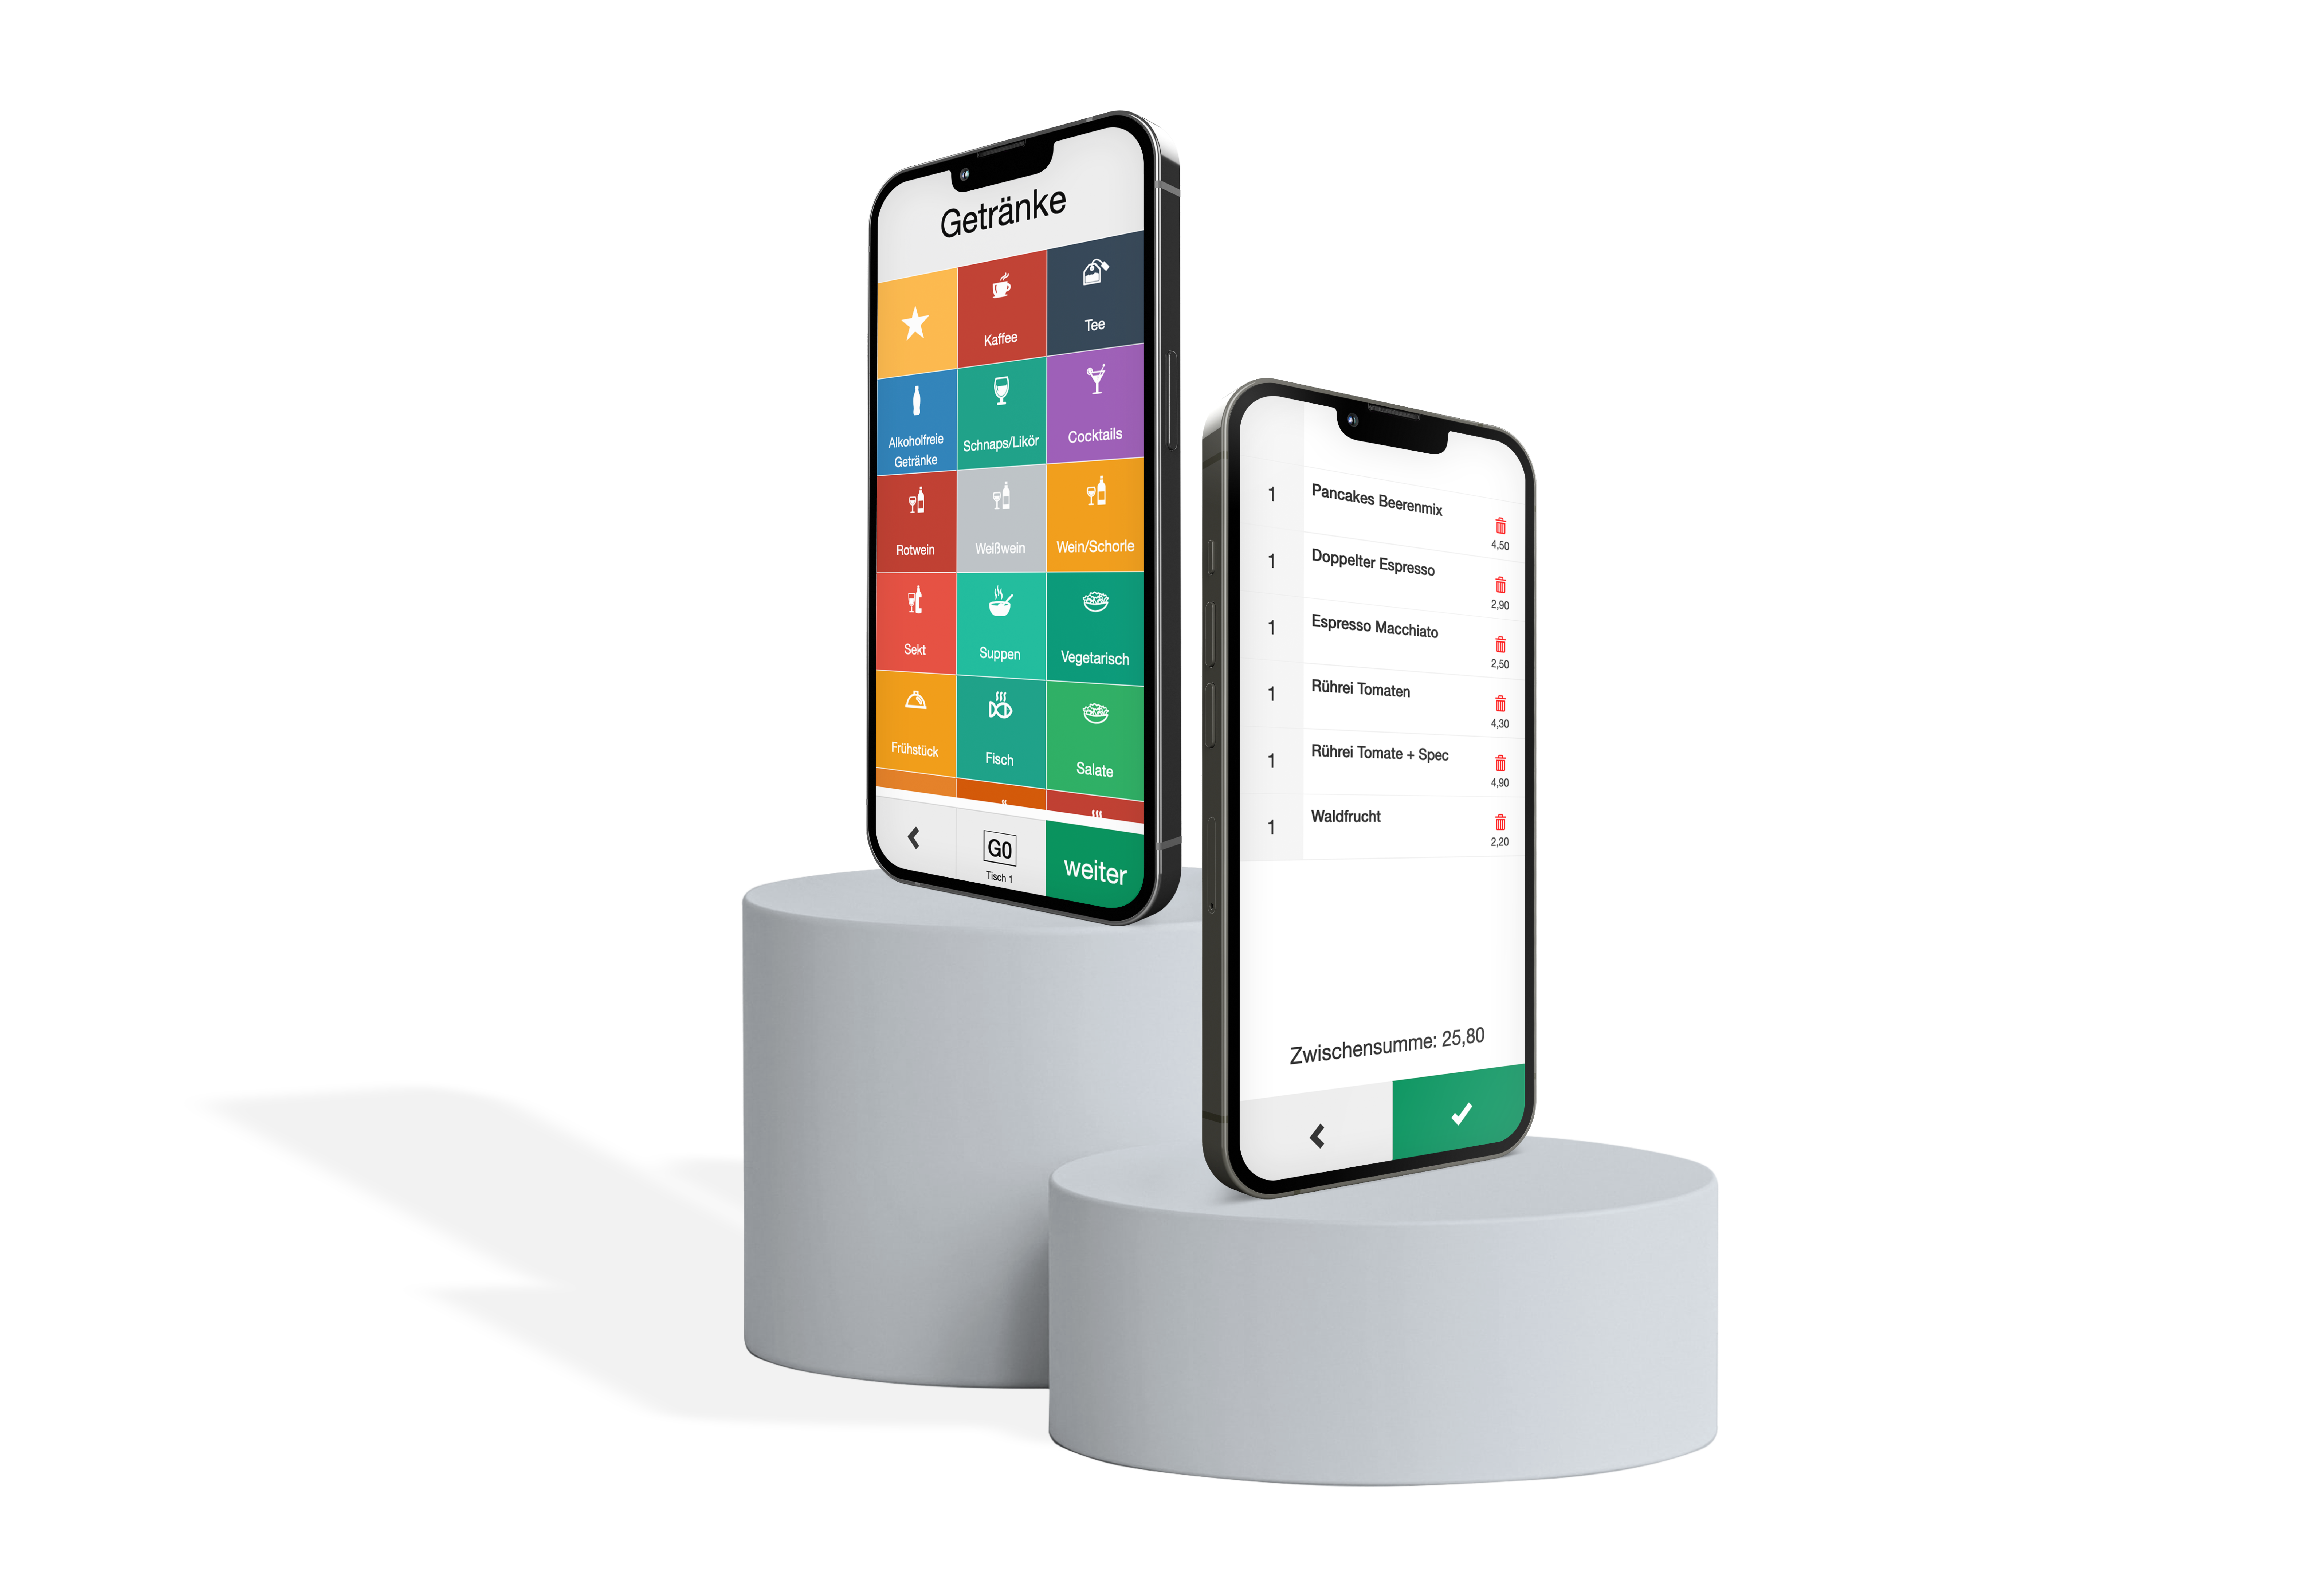 leafsystems Software am Smartphone